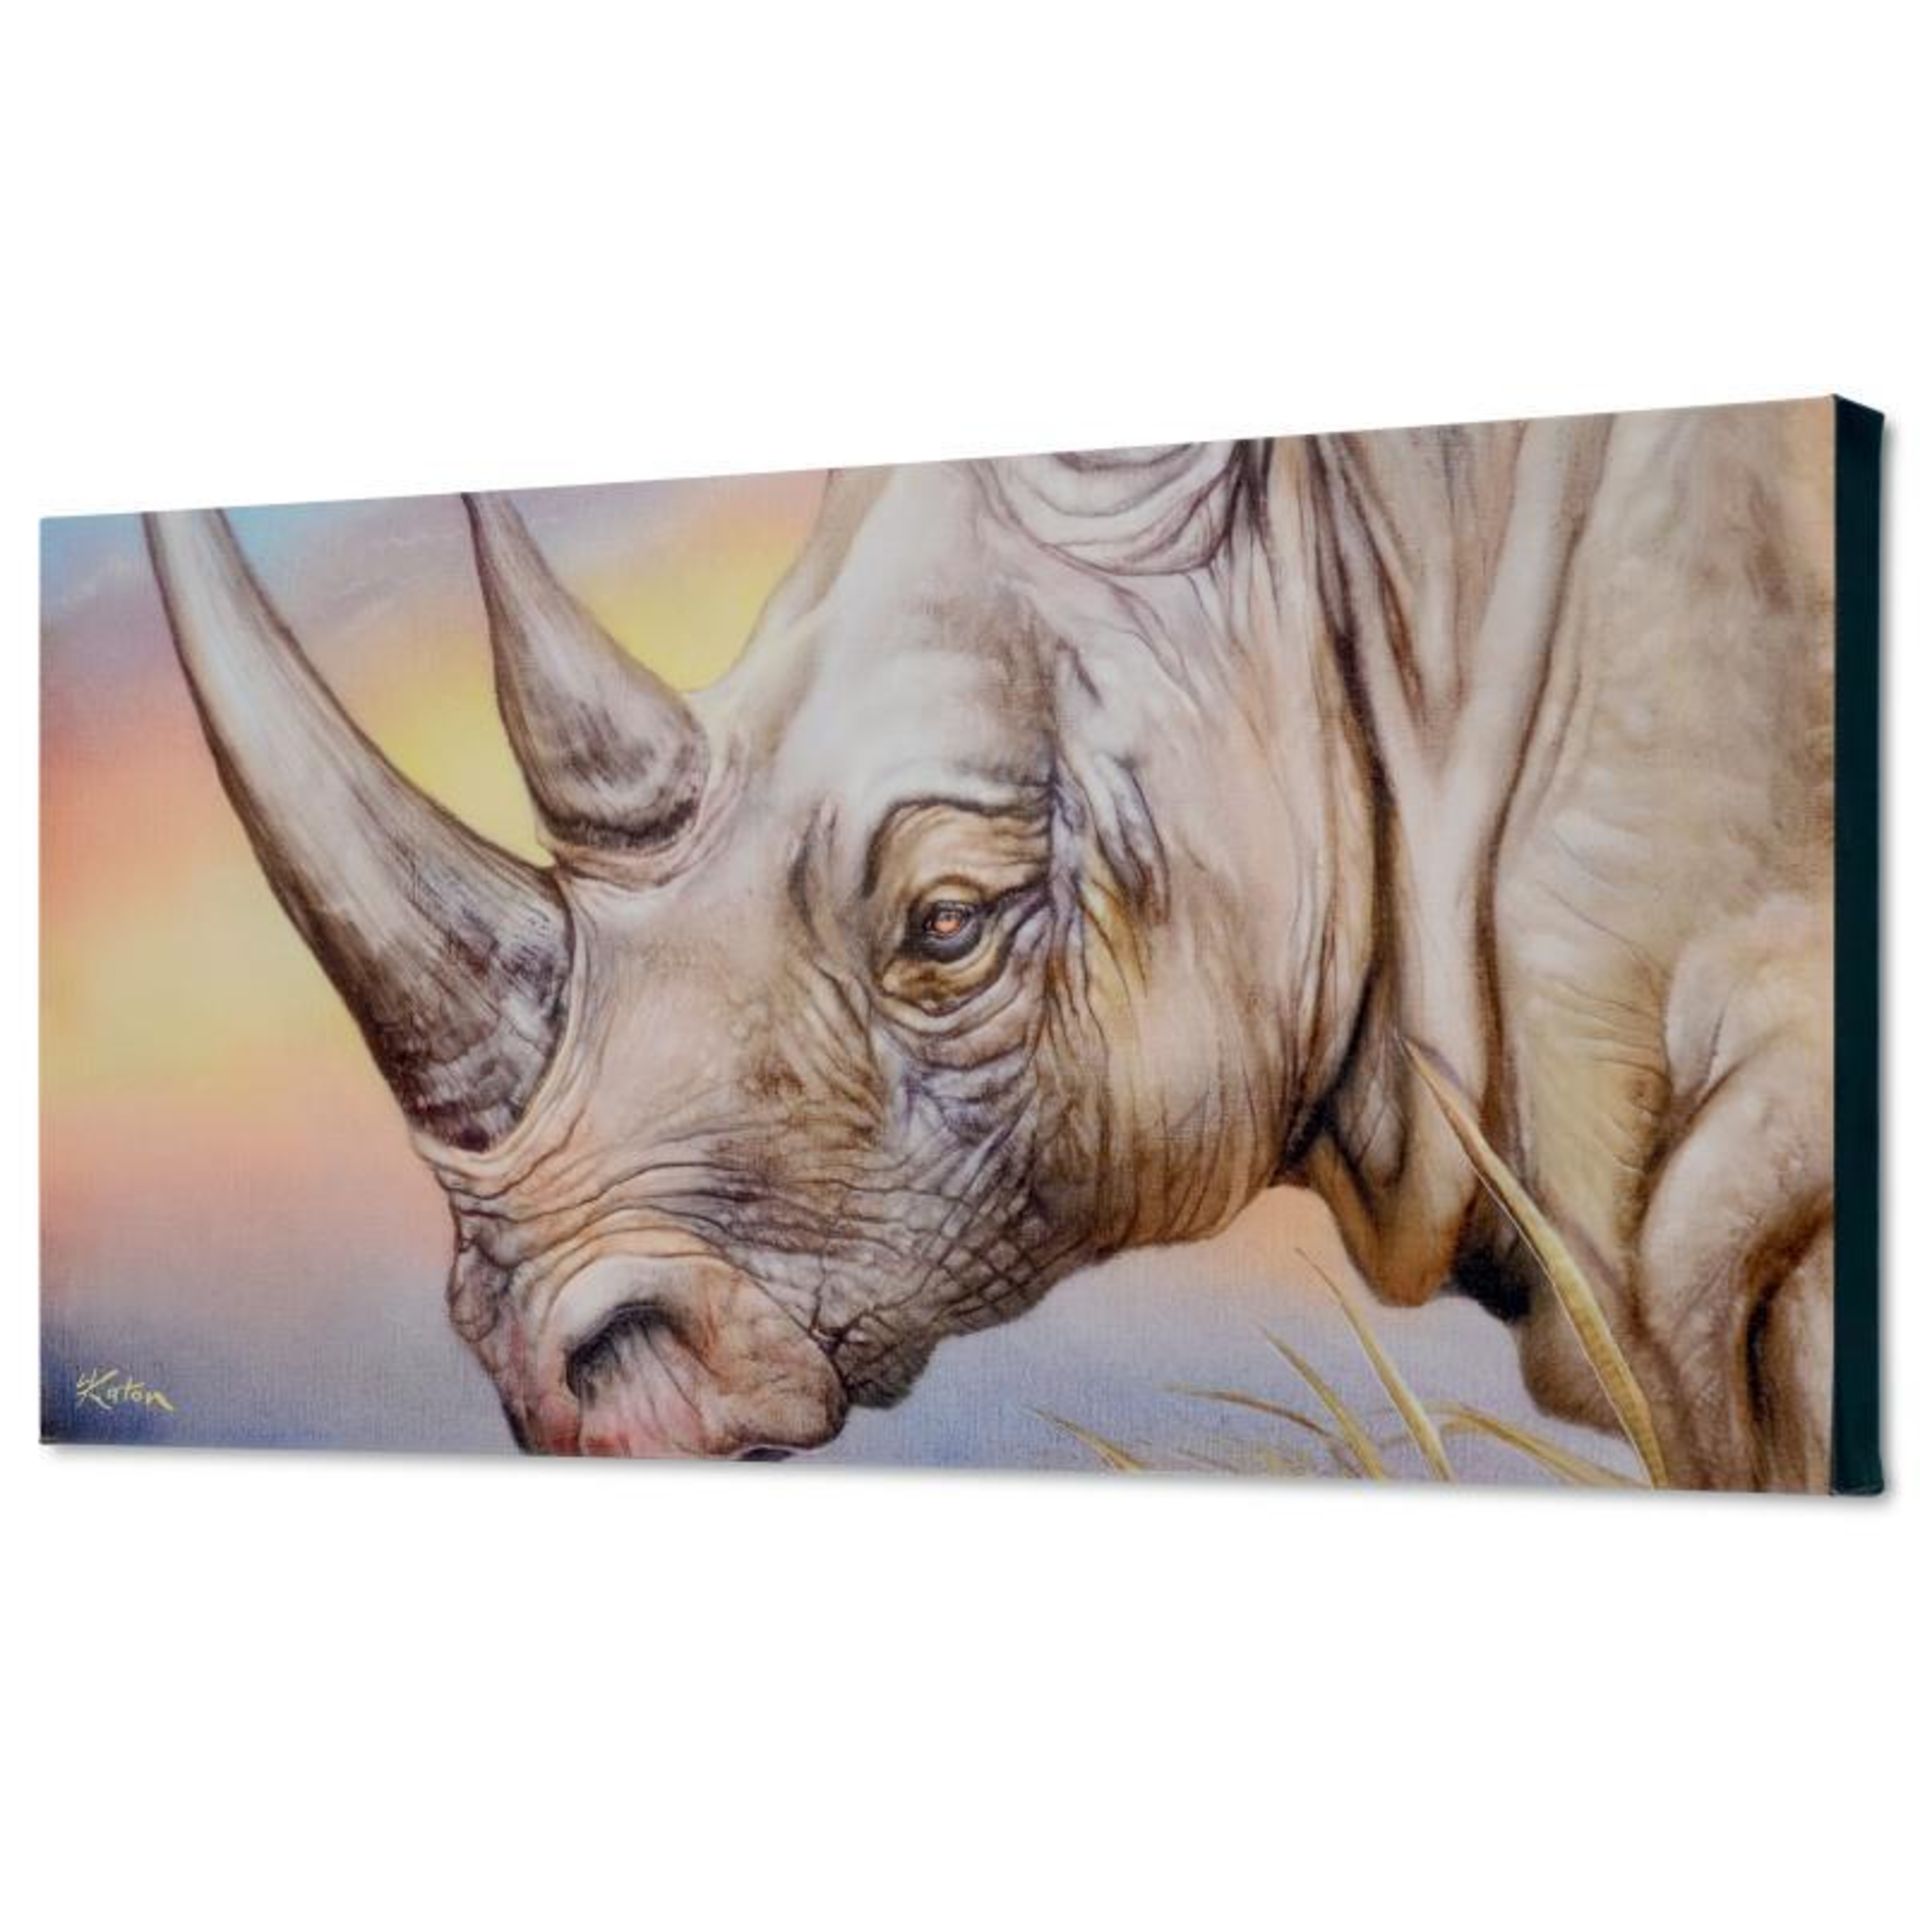 "White Rhino" Limited Edition Giclee on Canvas by Martin Katon, Numbered and Han - Image 2 of 2